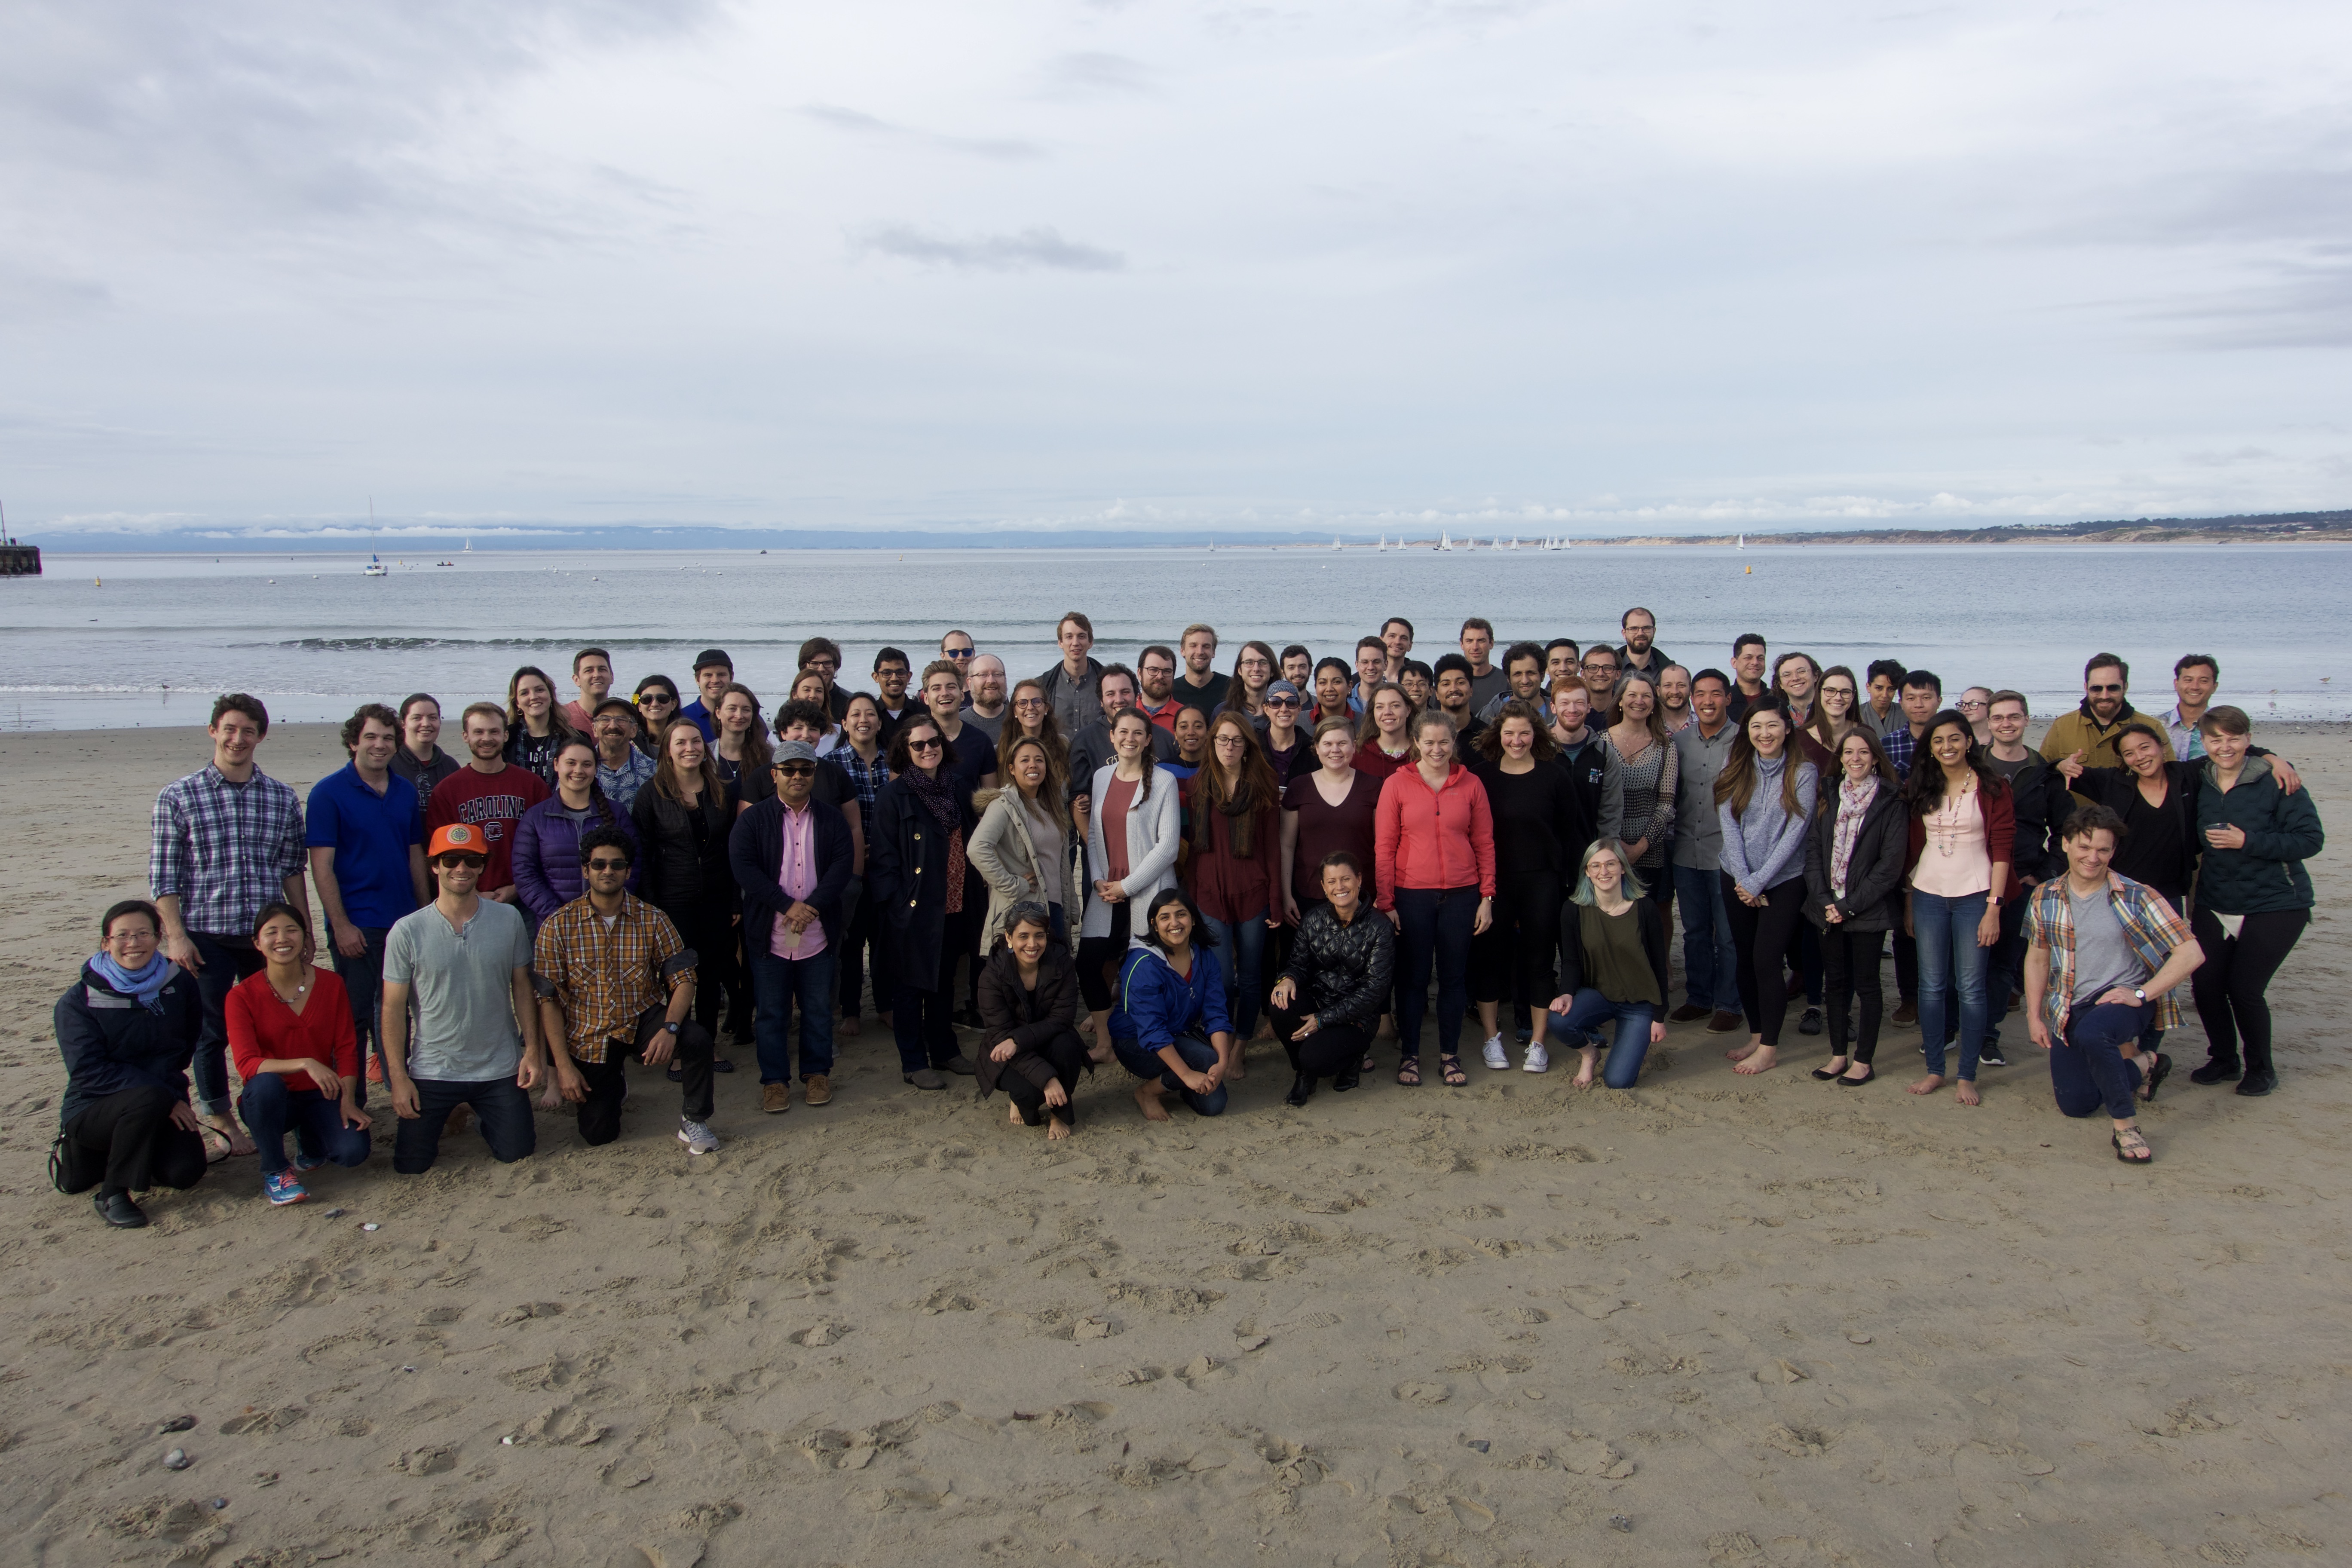 2019 PDP group photo on beach in Monterey CA